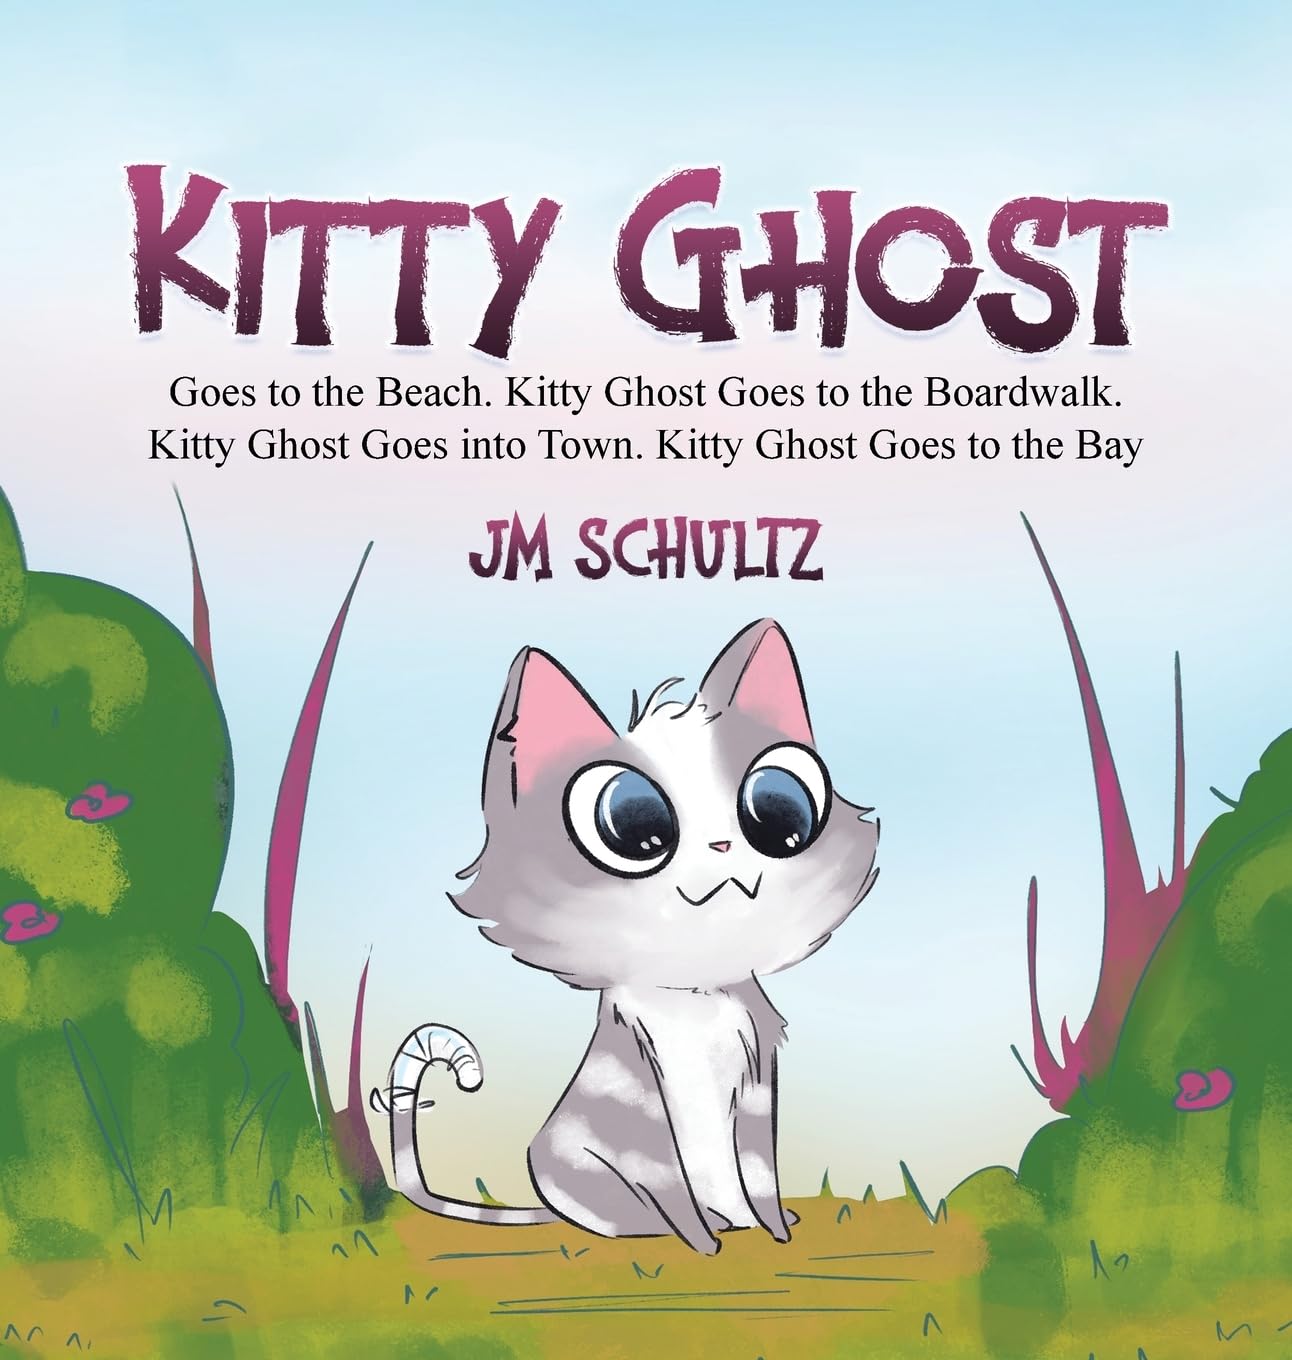 Joseph Schultz Unveils Captivating Novel ‘Kitty Ghost’ - A Tale of Whimsy, Adventure, and Heartwarming Magic